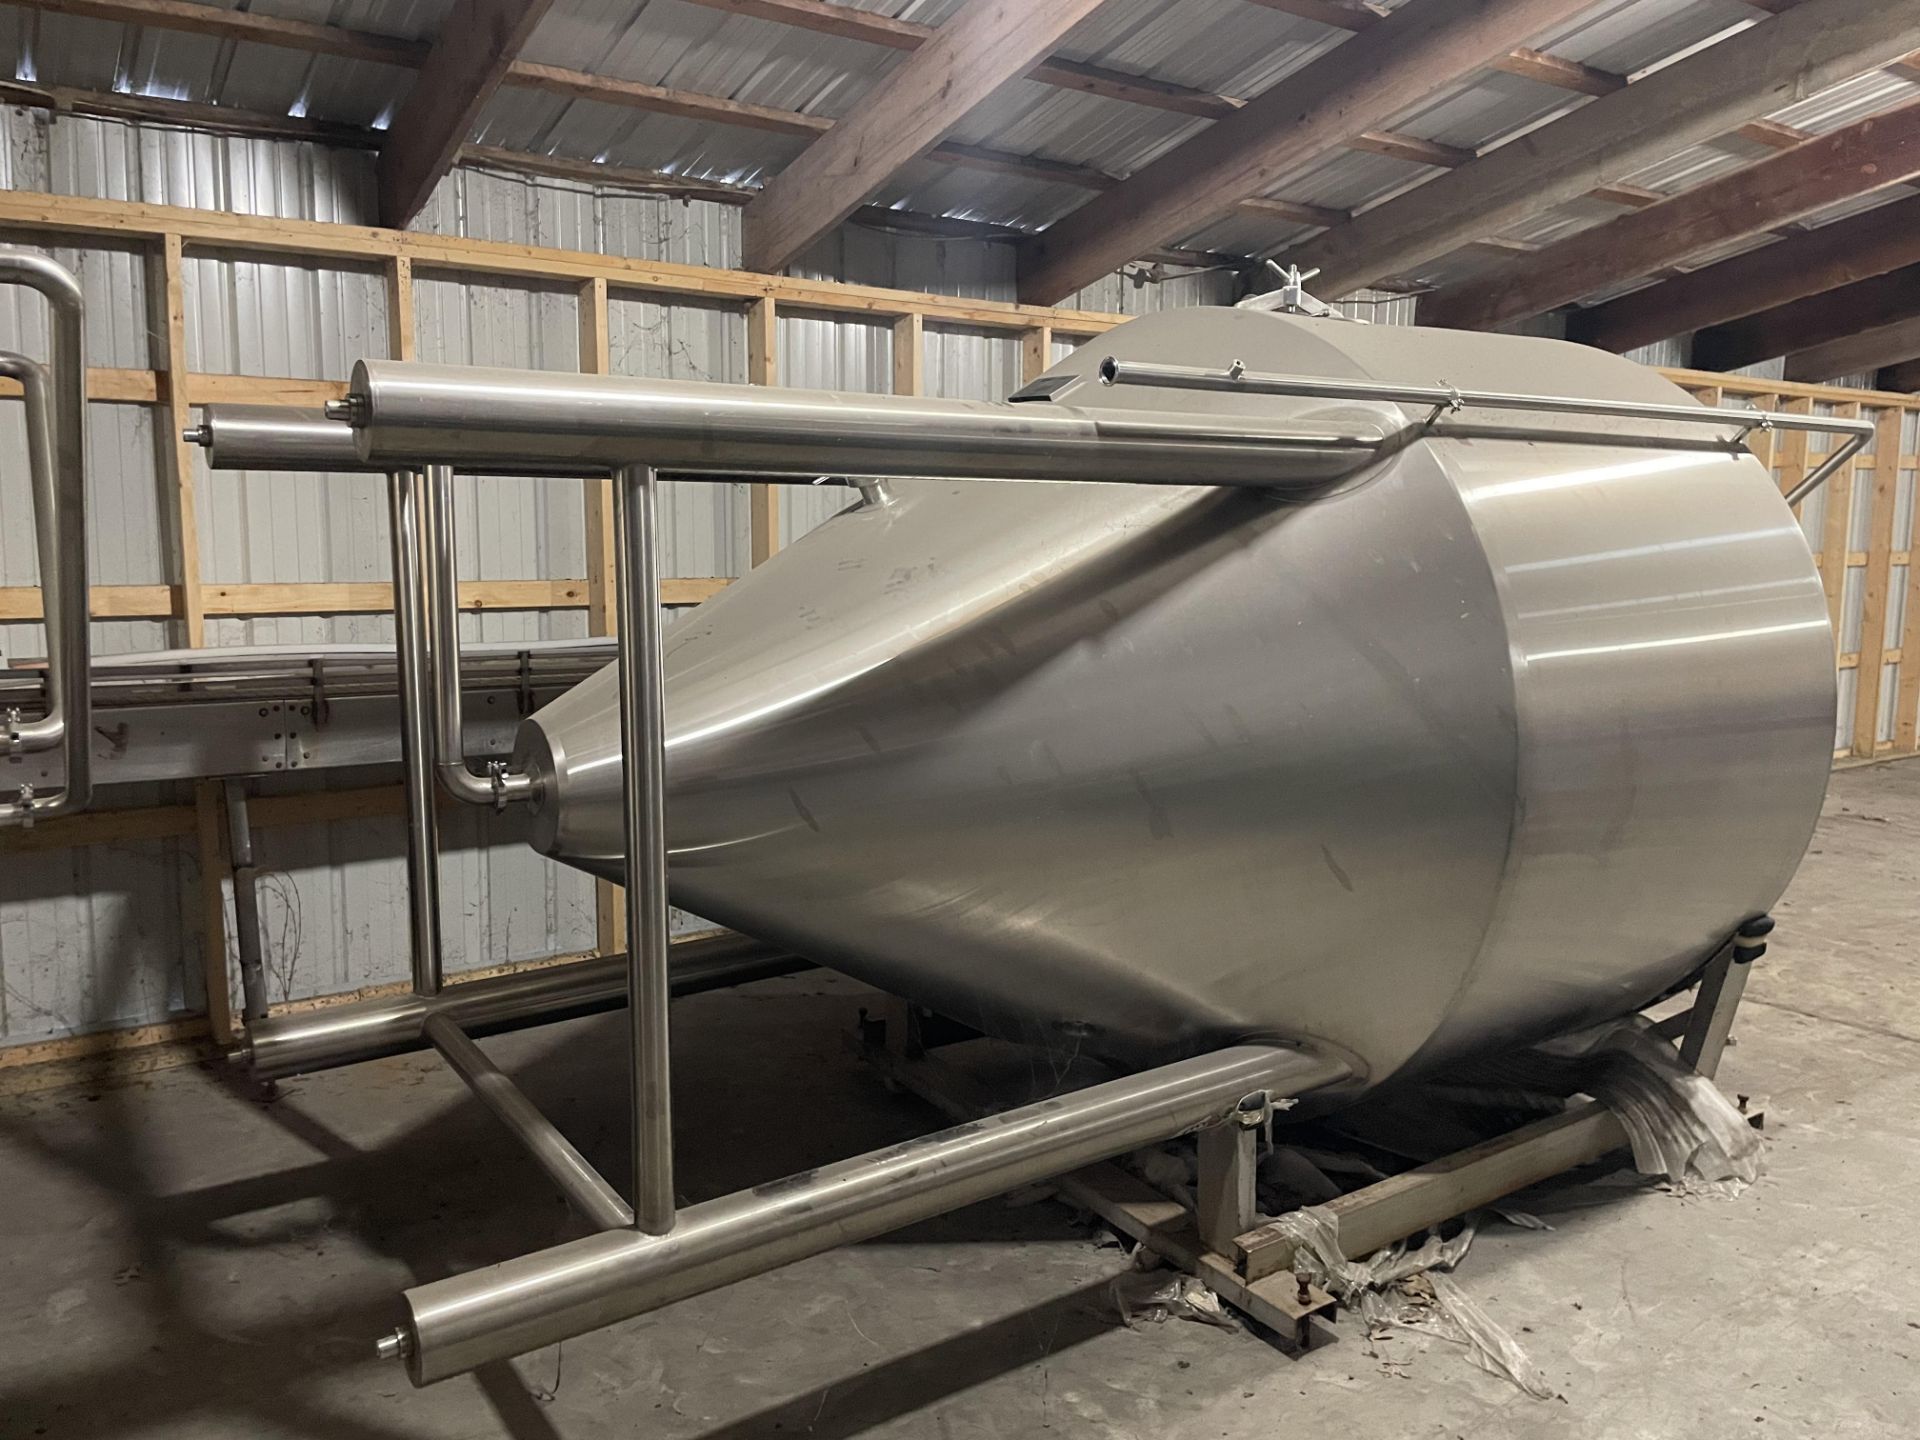 Consignment Item - located in Breese, IL: Lot of (1) NEVER USED, Kent 40 bbl Beer Fermenter, 2014 - Image 2 of 5